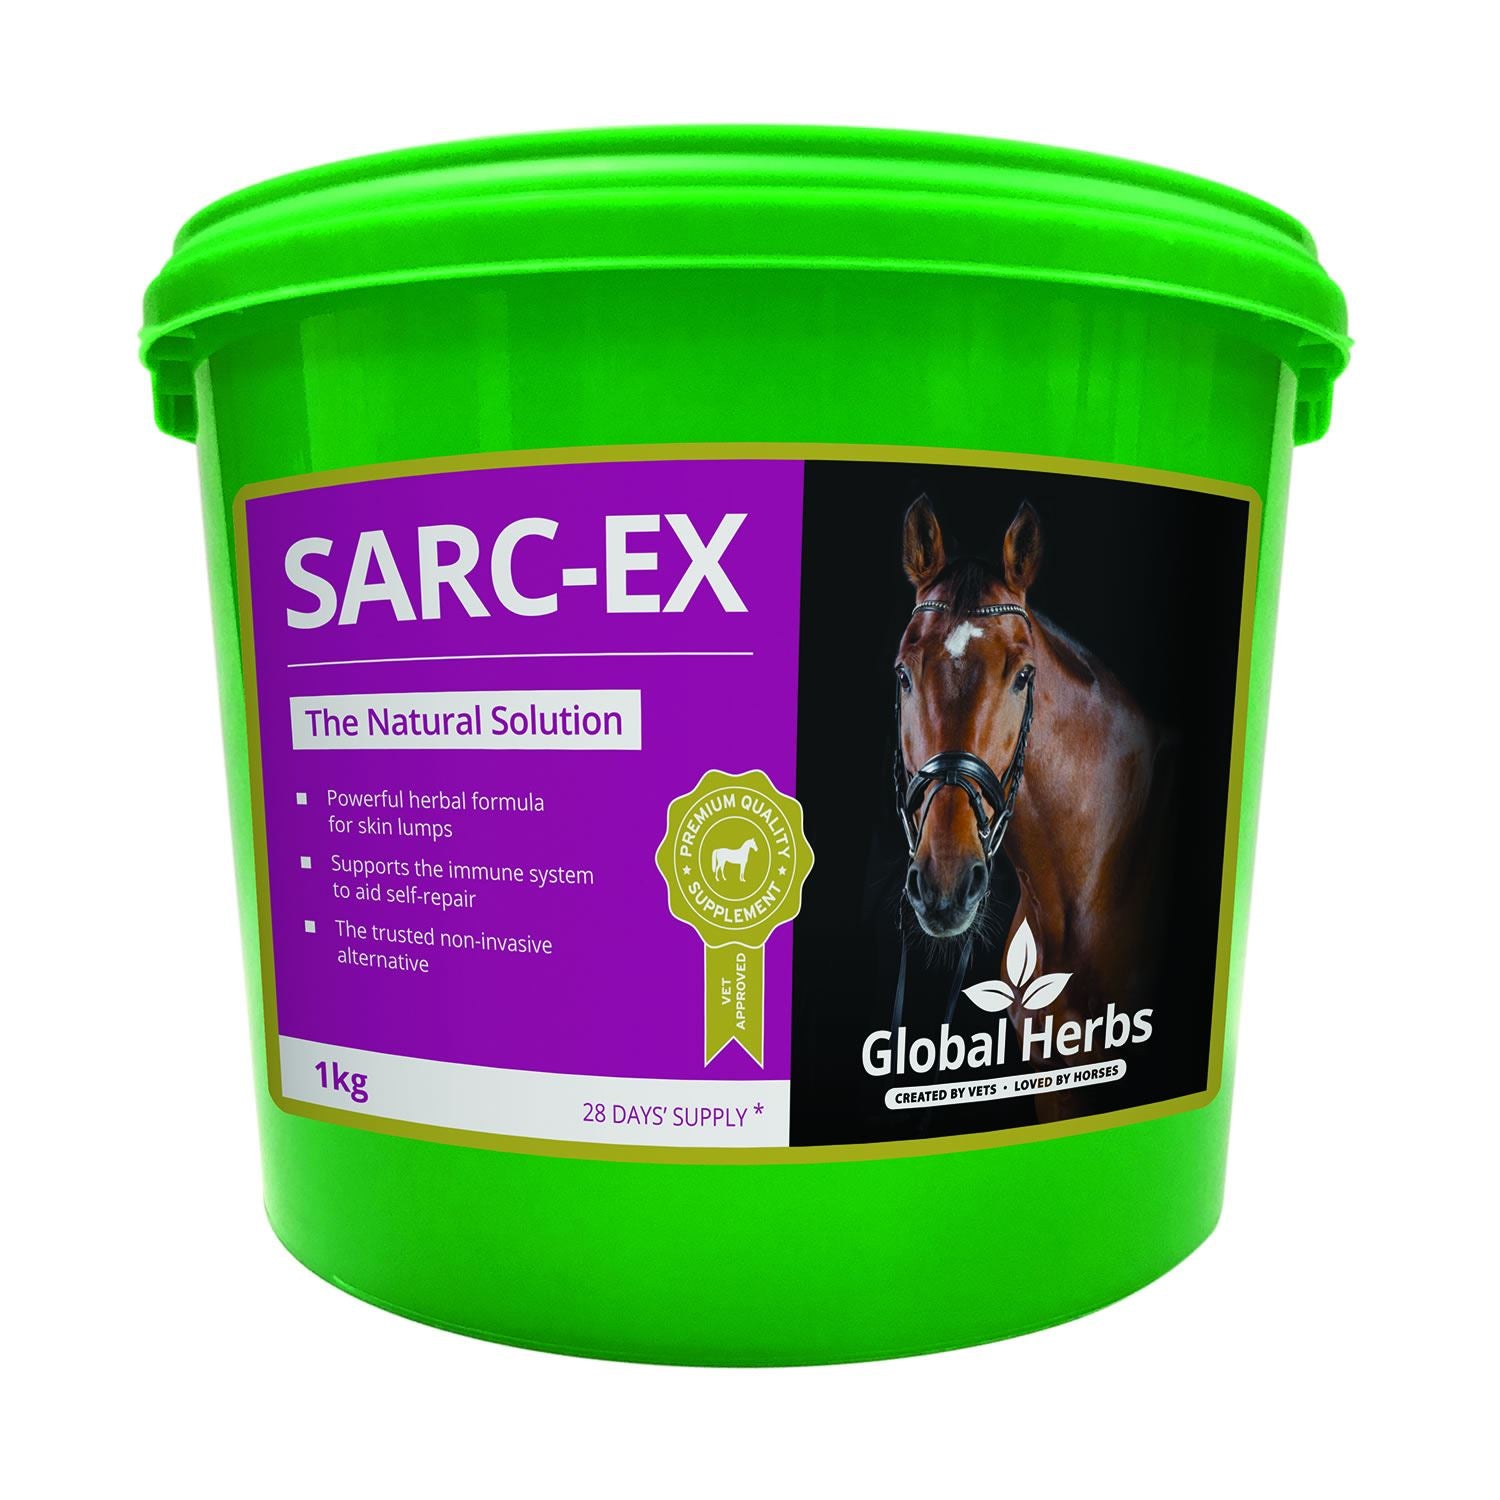 Global Herbs Sarc-Ex - herbal remedy for horse skin lumps and immune system support.